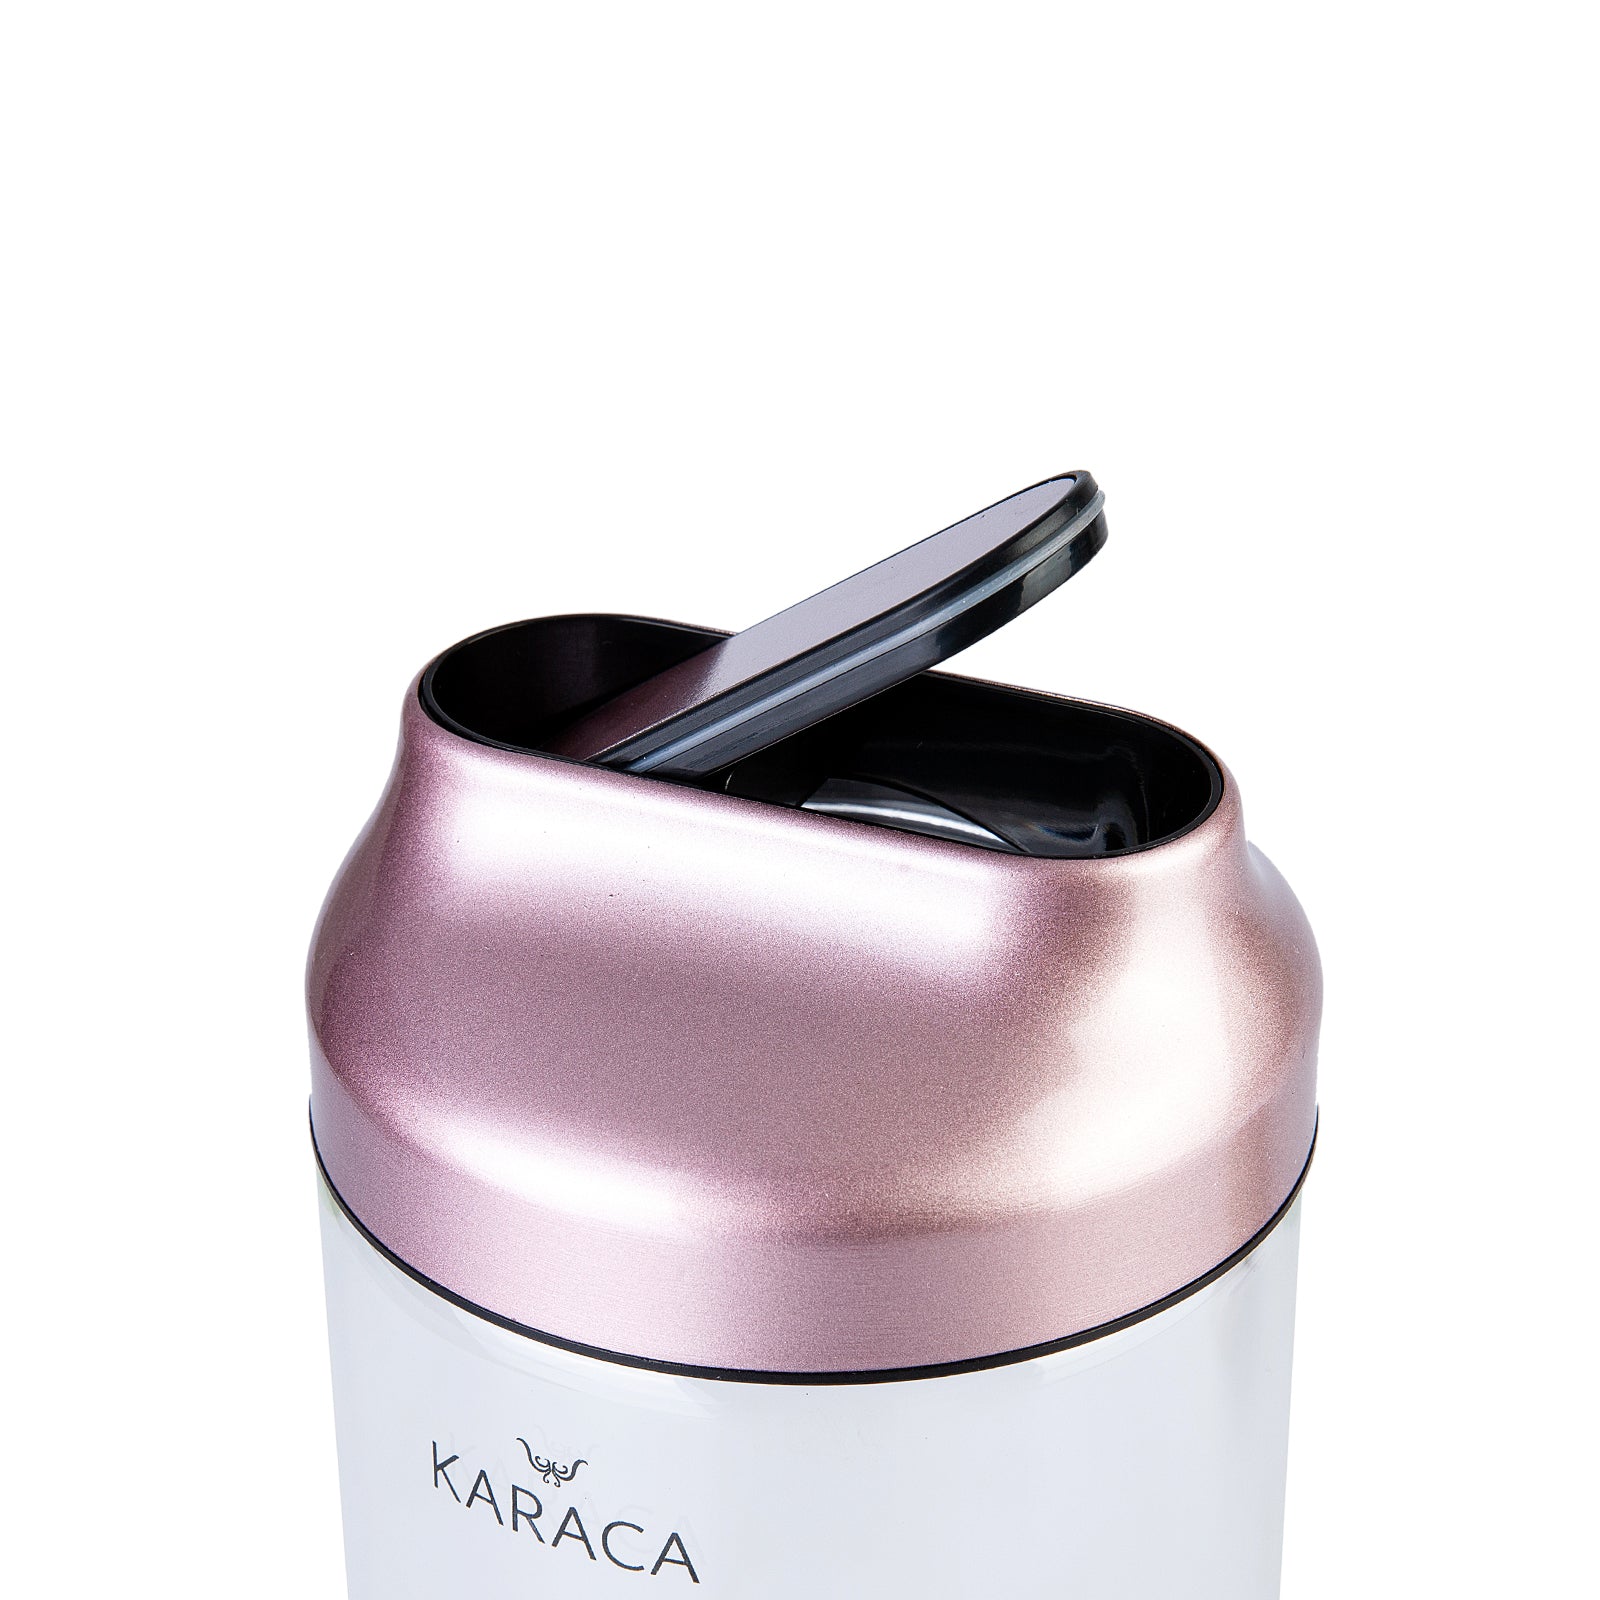 Karaca Dimple Storage Container, Large, Rose Gold L